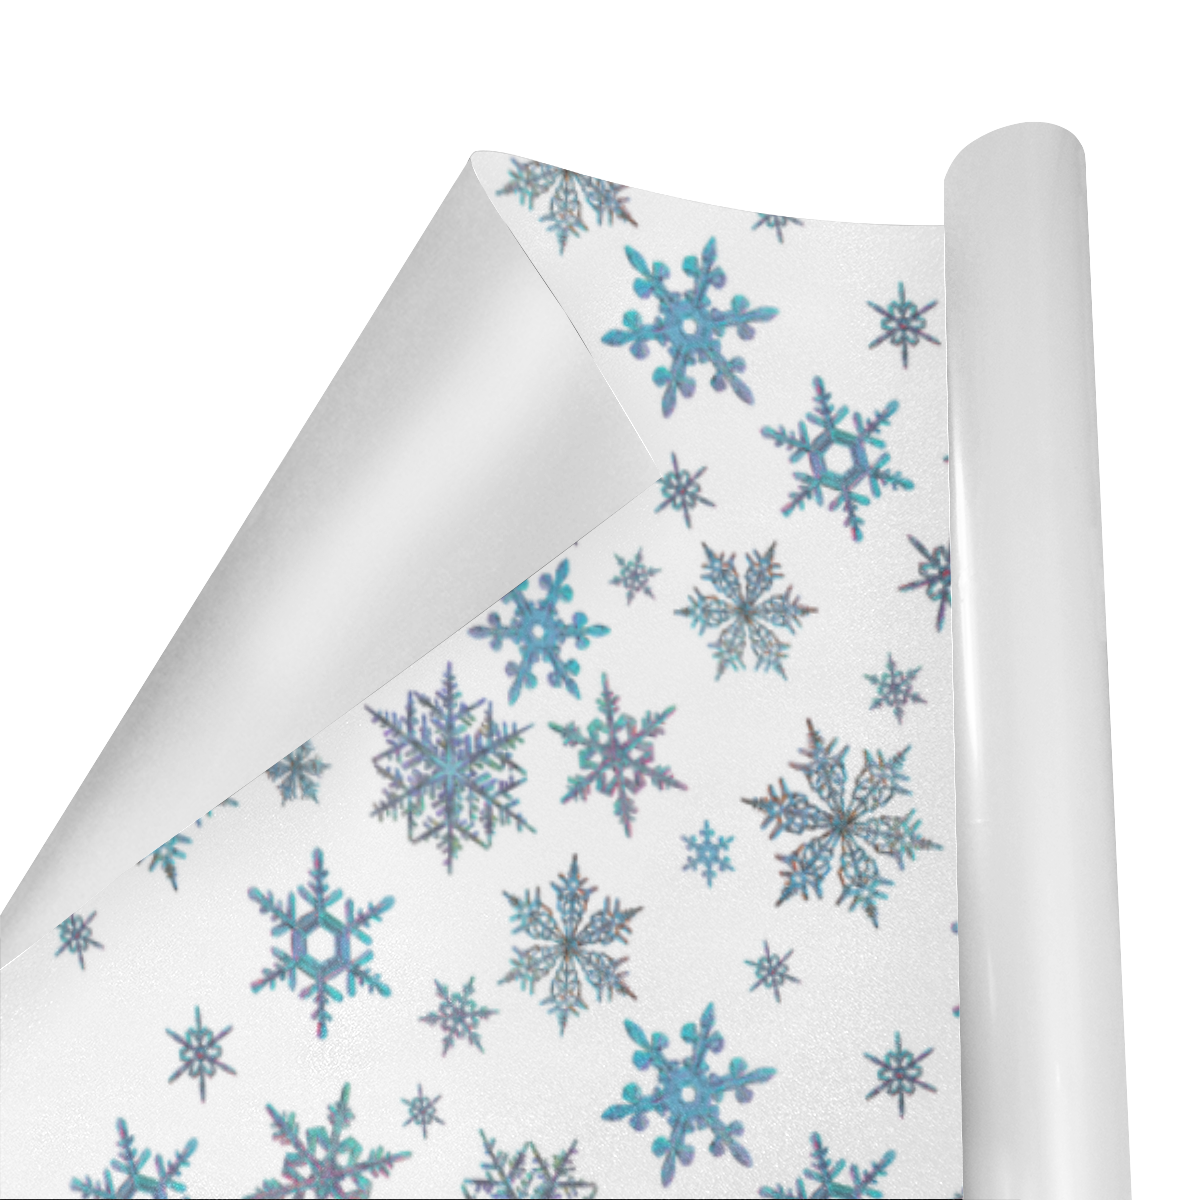 Snowflakes, Blue snow original design, Christmas Gift Wrapping Paper 58"x 23" (1 Roll)